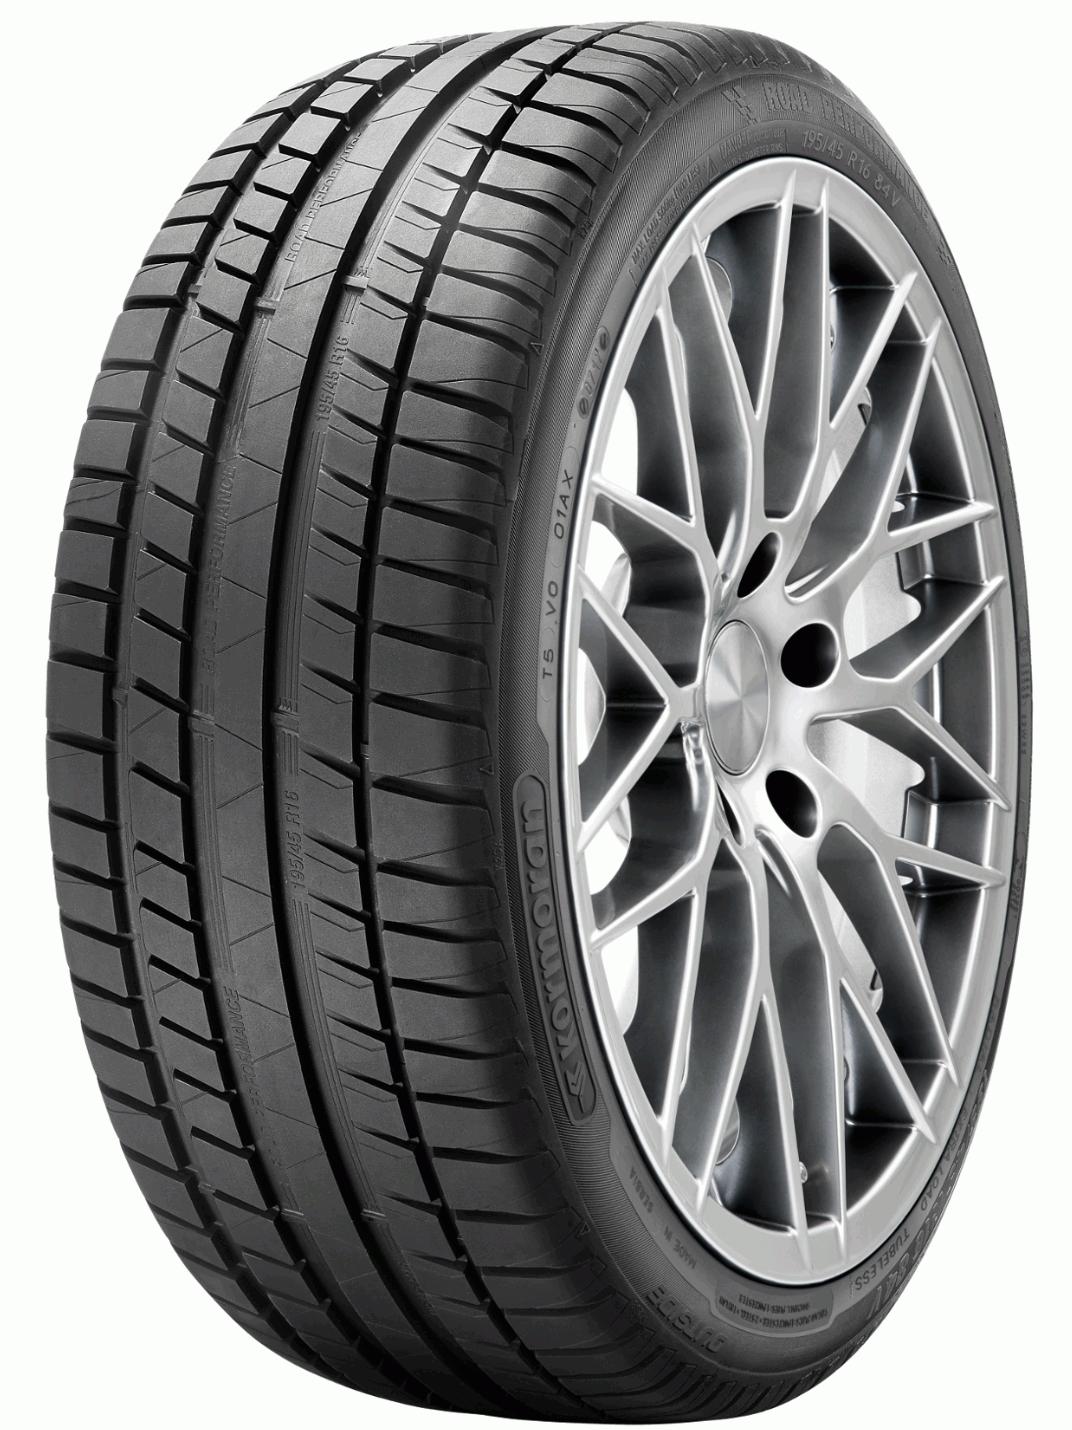 Riken Road Tests Tire and - Performance Reviews